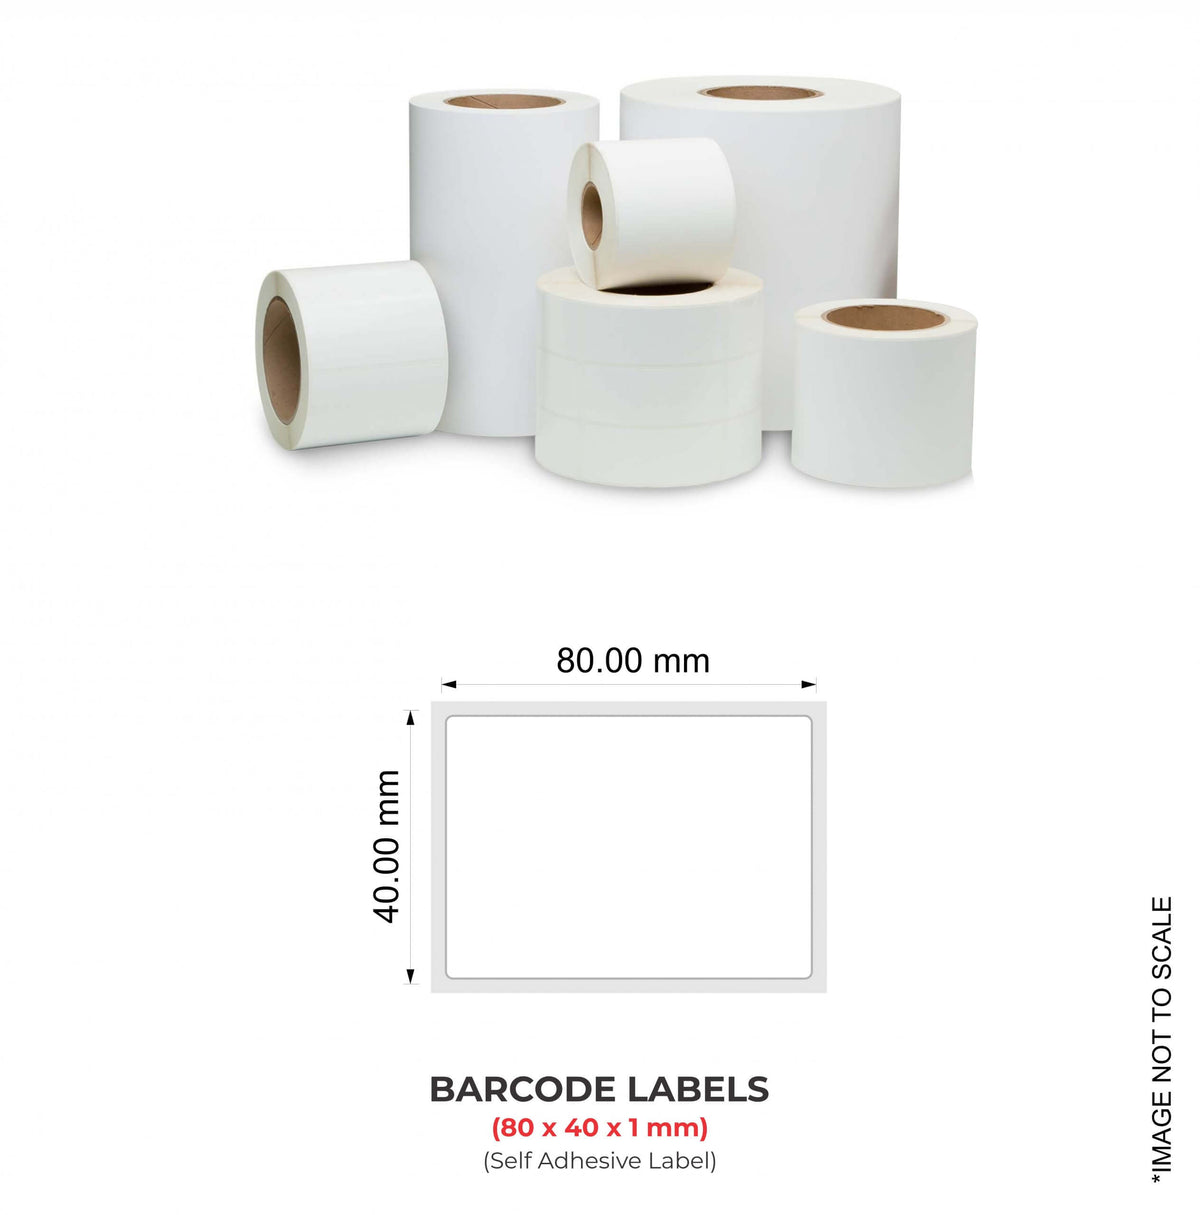 Barcode Labels (80x40x1mm), 1000 Labels Per Roll (Self Adhesive Label)